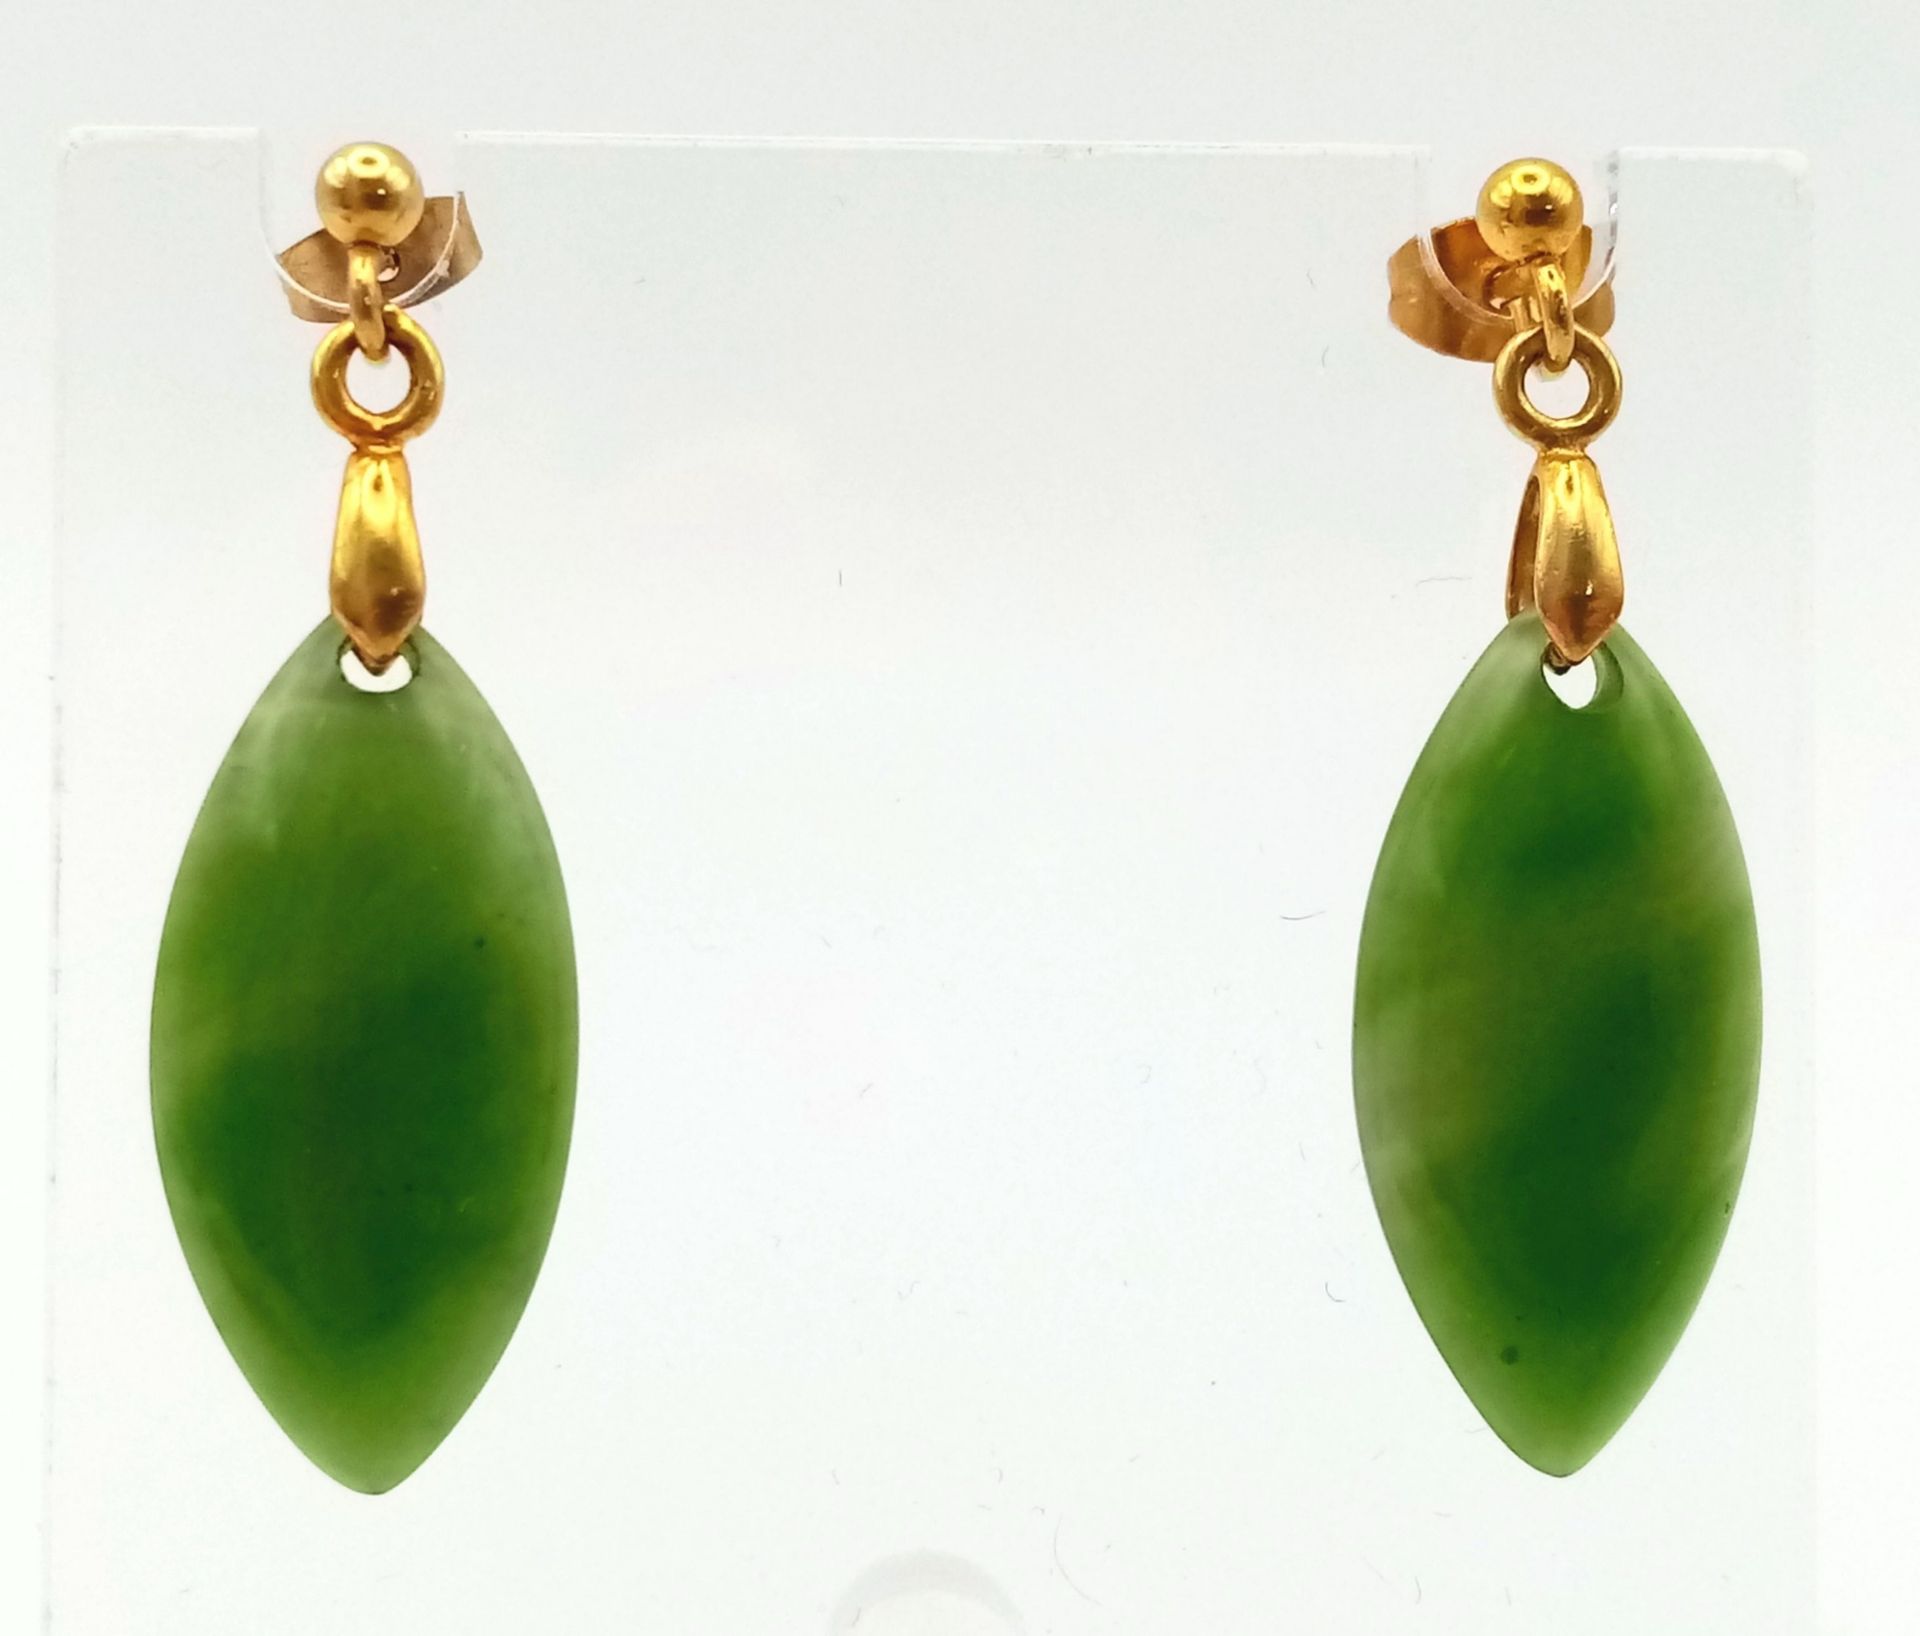 A Pair of 9K Yellow Gold Jade Leaf Shaped Earrings. 4.3g - Image 2 of 4